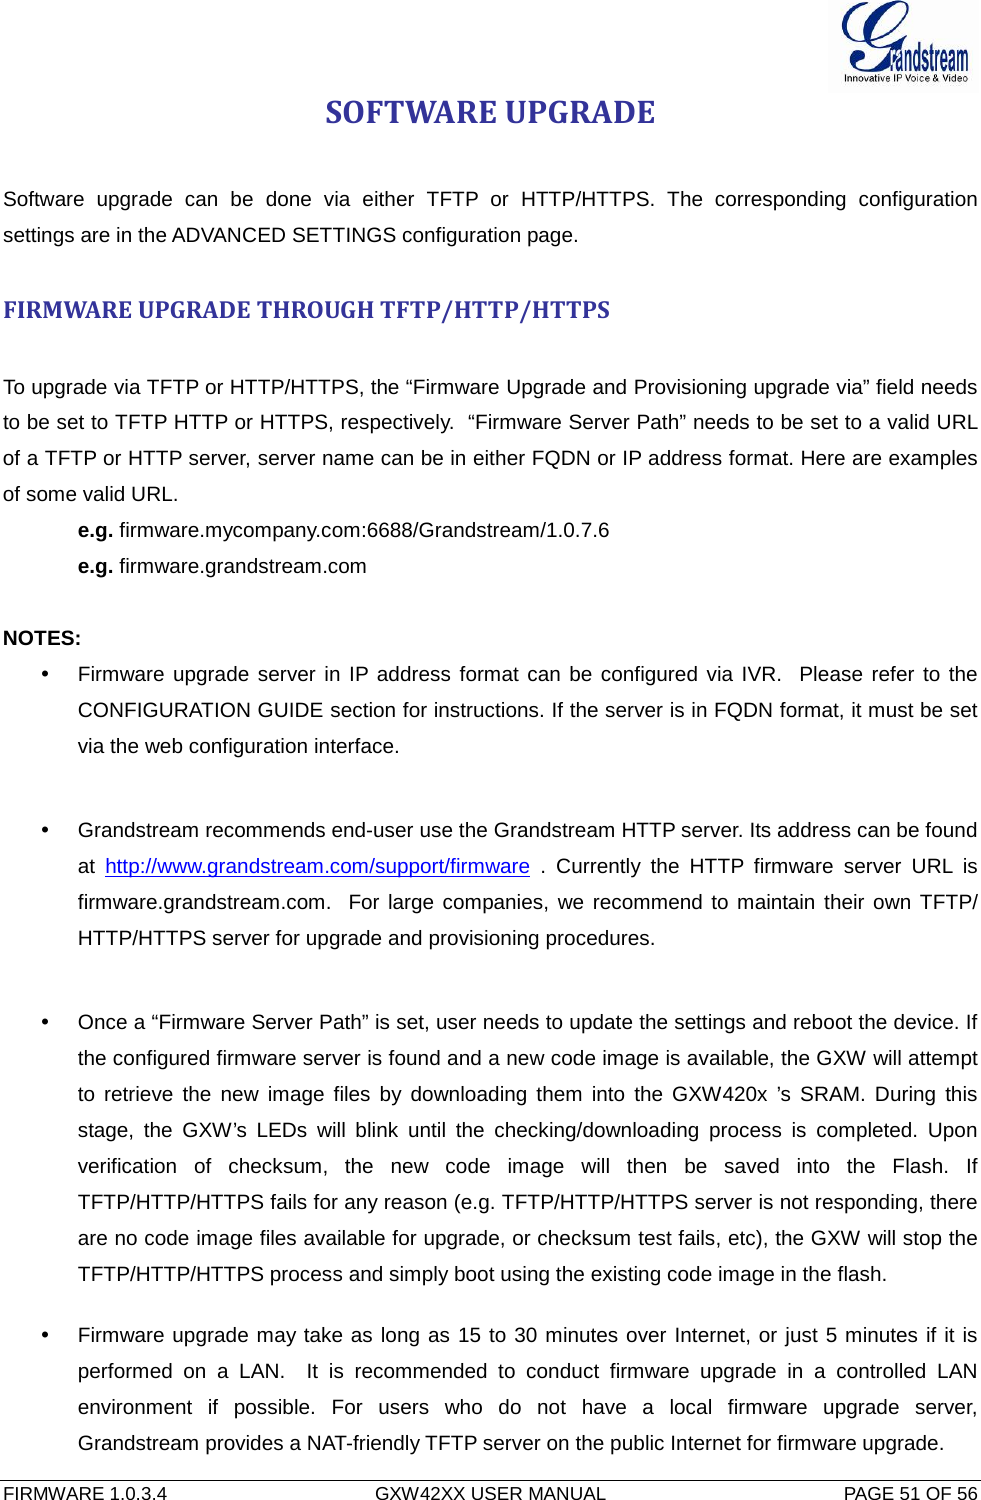  FIRMWARE 1.0.3.4  GXW42XX USER MANUAL  PAGE 51 OF 56      SOFTWARE UPGRADE   Software upgrade can be done via either TFTP or HTTP/HTTPS. The corresponding configuration settings are in the ADVANCED SETTINGS configuration page.   FIRMWARE UPGRADE THROUGH TFTP/HTTP/HTTPS  To upgrade via TFTP or HTTP/HTTPS, the “Firmware Upgrade and Provisioning upgrade via” field needs to be set to TFTP HTTP or HTTPS, respectively.  “Firmware Server Path” needs to be set to a valid URL of a TFTP or HTTP server, server name can be in either FQDN or IP address format. Here are examples of some valid URL.  e.g. firmware.mycompany.com:6688/Grandstream/1.0.7.6 e.g. firmware.grandstream.com   NOTES:  Firmware upgrade server in IP address format can be configured via IVR.  Please refer to the CONFIGURATION GUIDE section for instructions. If the server is in FQDN format, it must be set via the web configuration interface.   Grandstream recommends end-user use the Grandstream HTTP server. Its address can be found at http://www.grandstream.com/support/firmware . Currently the HTTP  firmware server URL is firmware.grandstream.com.  For large companies, we recommend to maintain their own TFTP/ HTTP/HTTPS server for upgrade and provisioning procedures.   Once a “Firmware Server Path” is set, user needs to update the settings and reboot the device. If the configured firmware server is found and a new code image is available, the GXW will attempt to retrieve the new image files by downloading them into the GXW420x  ’s SRAM. During this stage, the GXW’s LEDs will blink until the checking/downloading process is completed. Upon verification of checksum, the new code image will then be saved into the Flash. If TFTP/HTTP/HTTPS fails for any reason (e.g. TFTP/HTTP/HTTPS server is not responding, there are no code image files available for upgrade, or checksum test fails, etc), the GXW will stop the TFTP/HTTP/HTTPS process and simply boot using the existing code image in the flash.   Firmware upgrade may take as long as 15 to 30 minutes over Internet, or just 5 minutes if it is performed on a LAN.  It is recommended to conduct firmware upgrade in a controlled LAN environment if possible. For users who do not have a local firmware upgrade server, Grandstream provides a NAT-friendly TFTP server on the public Internet for firmware upgrade. 